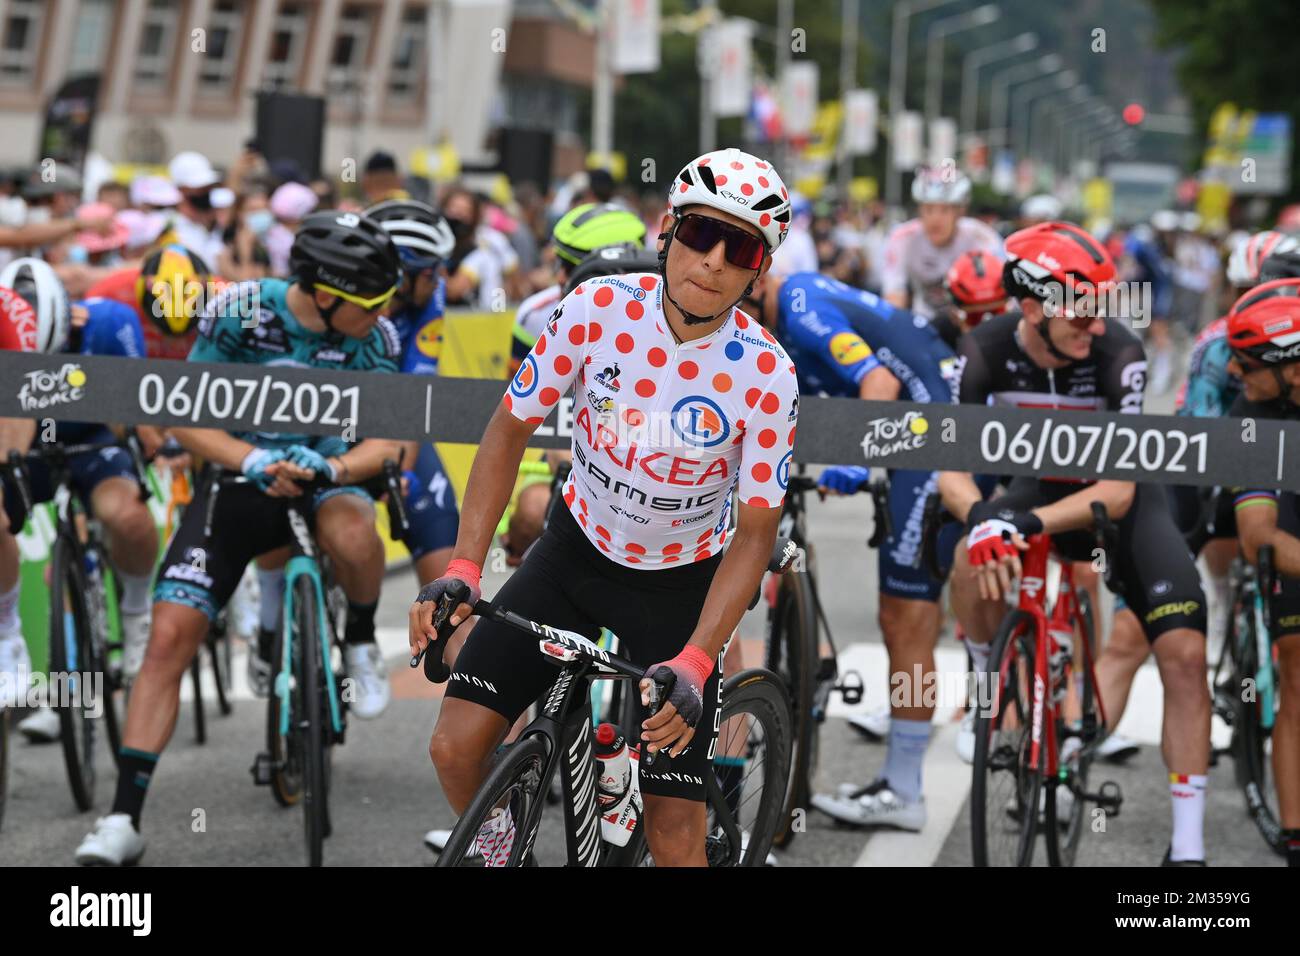 Colombian Nairo Quintana of Team Arkea Samsic wearing the red polka-dot jersey for best climber pictured at the start of stage 10 of the 108th edition of the Tour de France cycling race, 190,7 km from Albertville to Valence, France, Tuesday 06 July 2021. This year's Tour de France takes place from 26 June to 18 July 2021. BELGA PHOTO DAVID STOCKMAN  Stock Photo